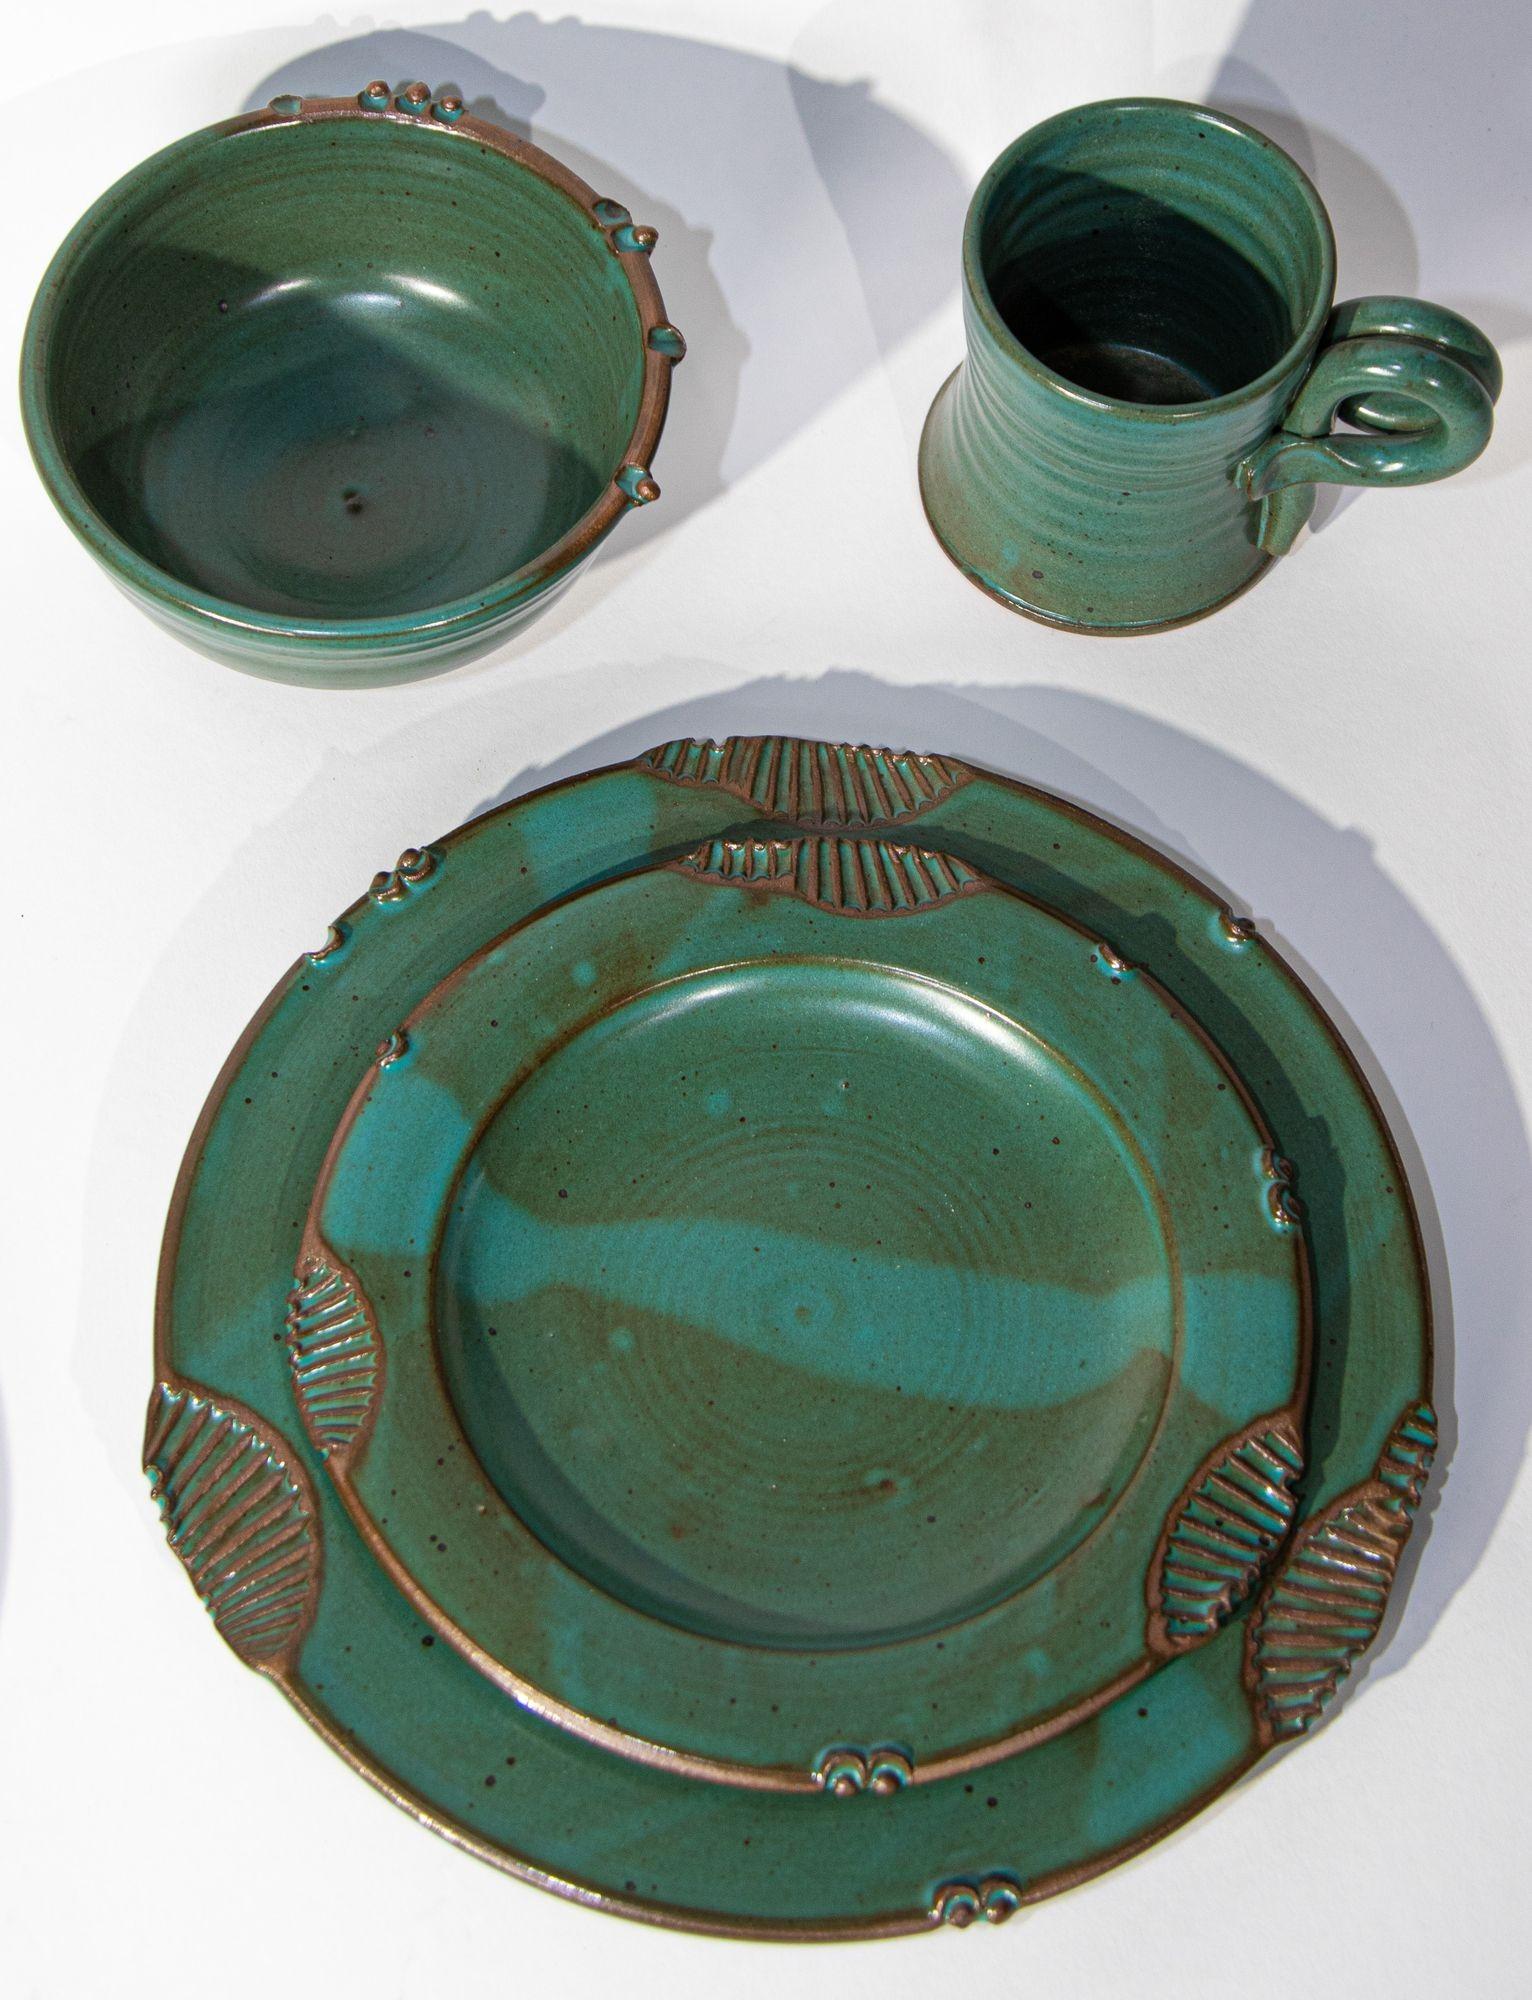 Paul Anthony Vintage Teal Green Stoneware Service Set of 8 In Good Condition For Sale In North Hollywood, CA